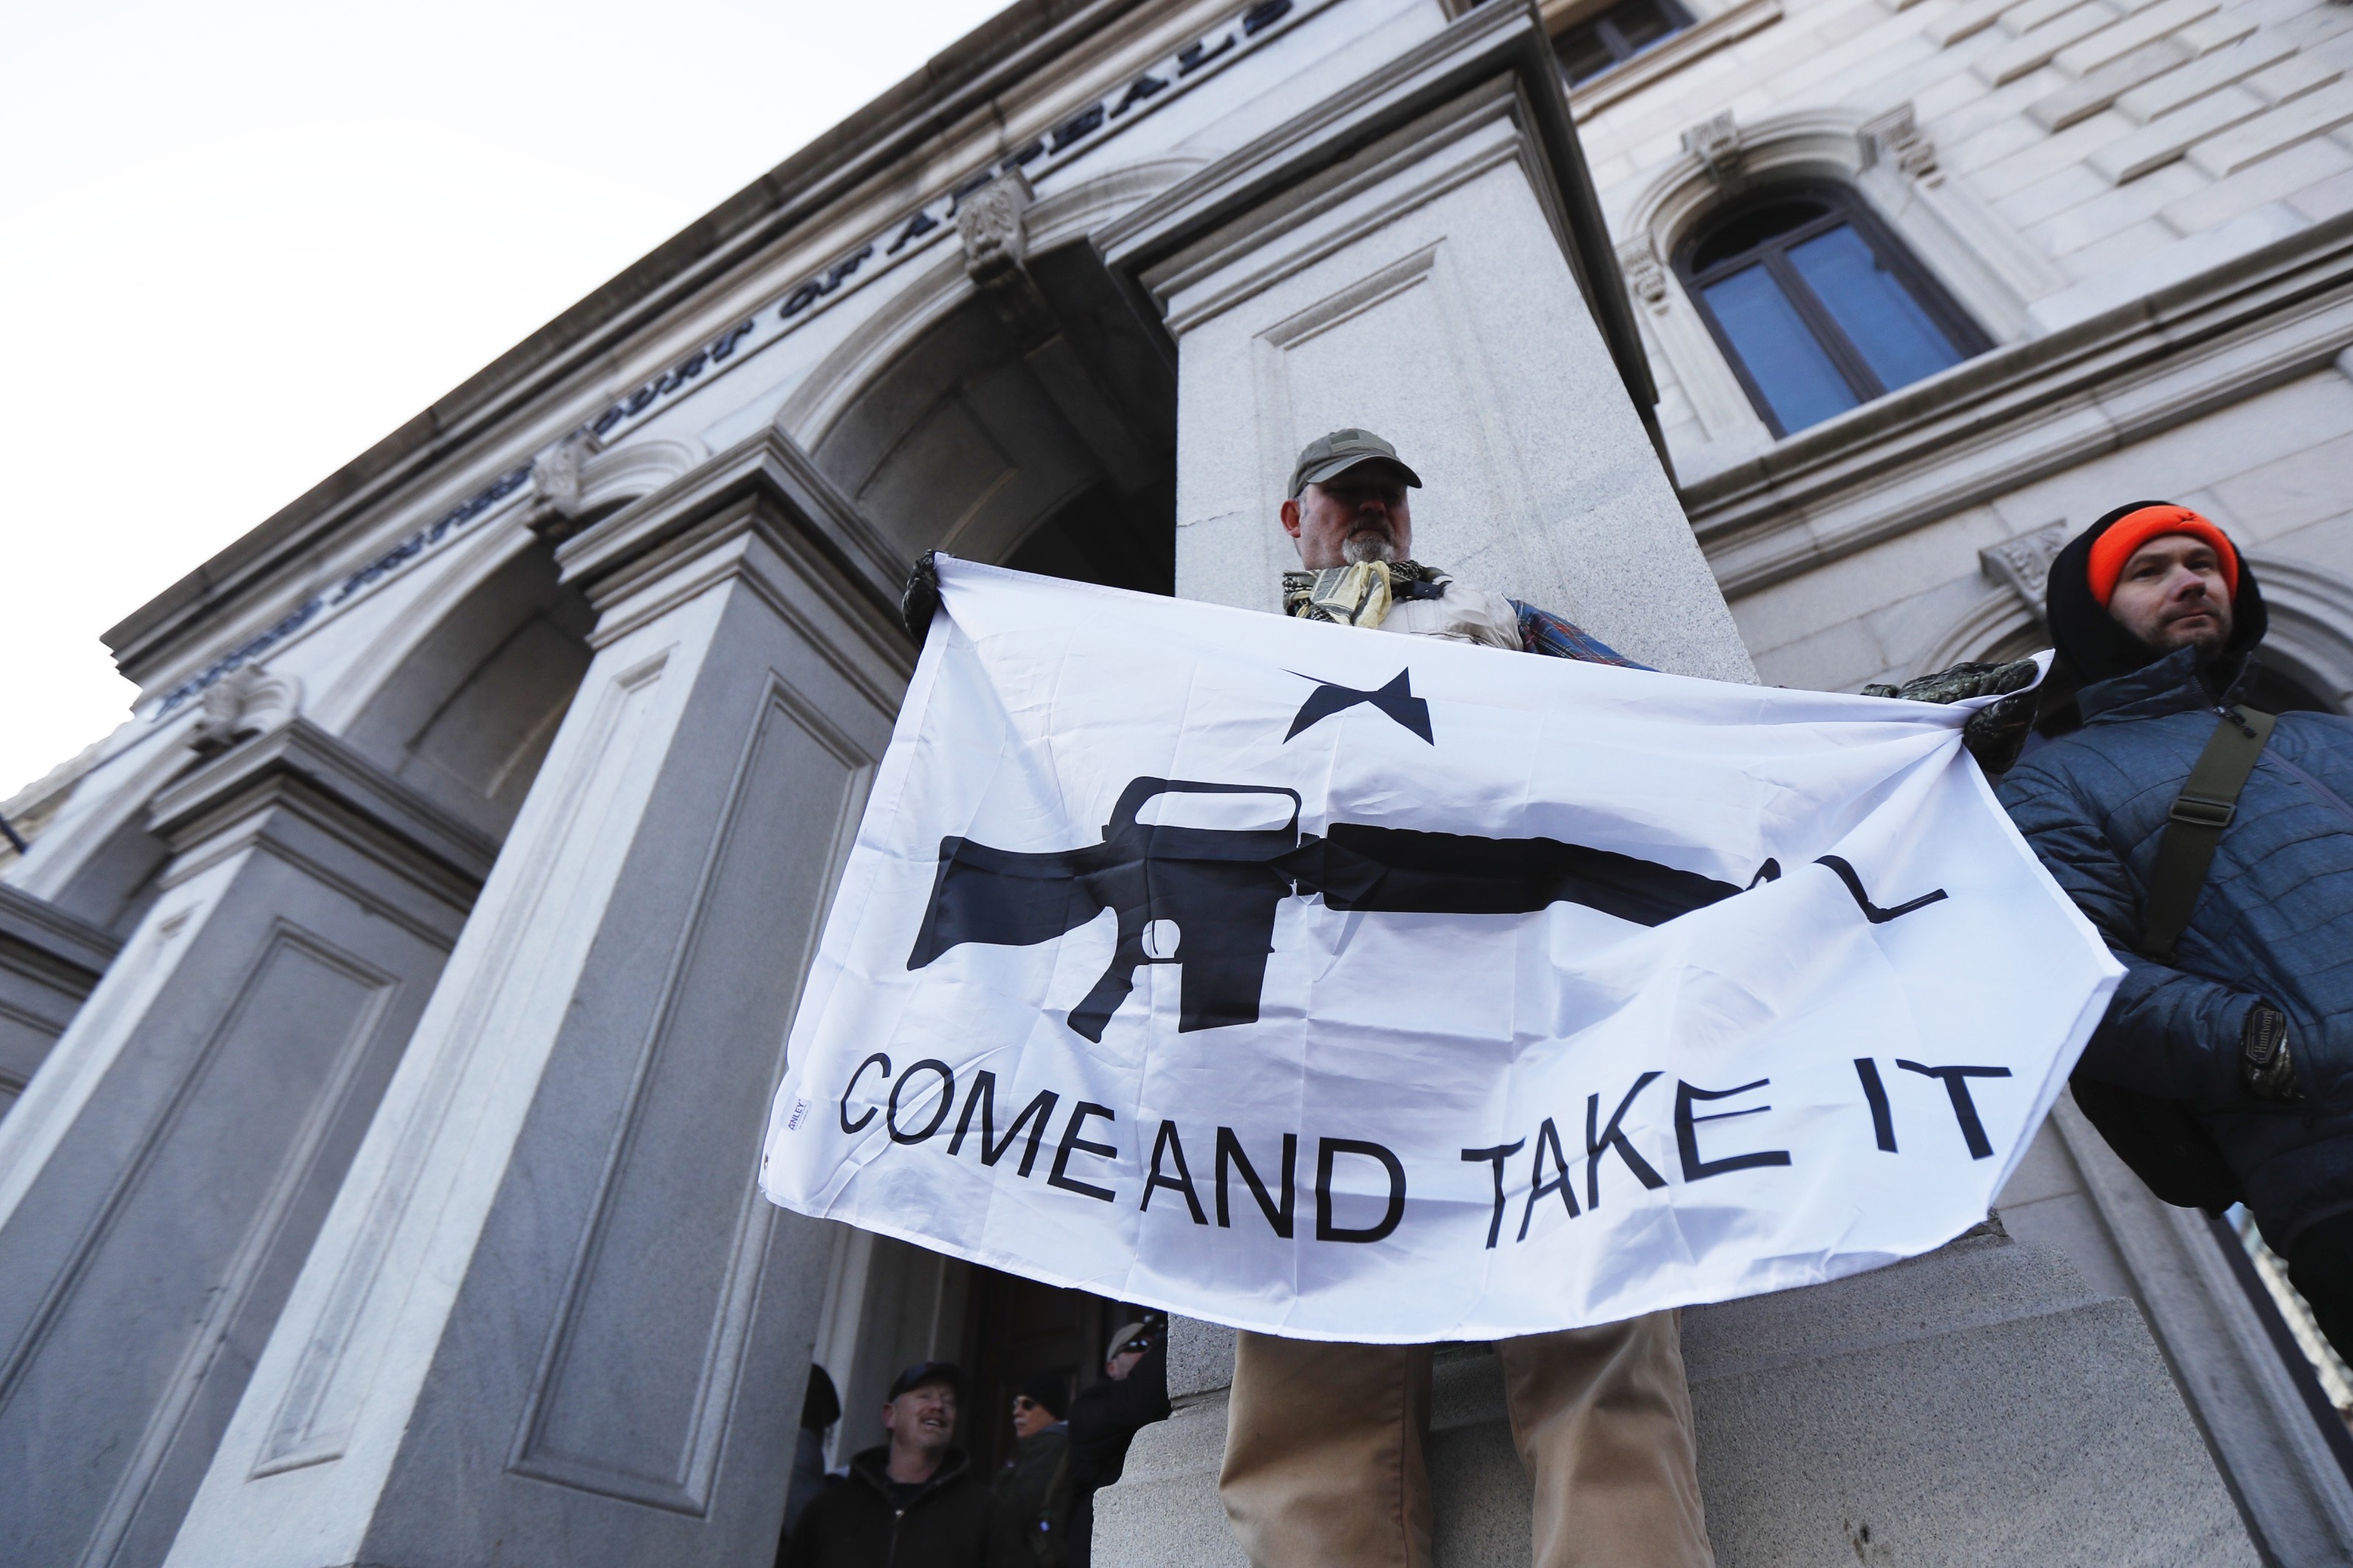 Sound, Fury, but No Violence as Thousands Protest New Gun Laws in Virginia